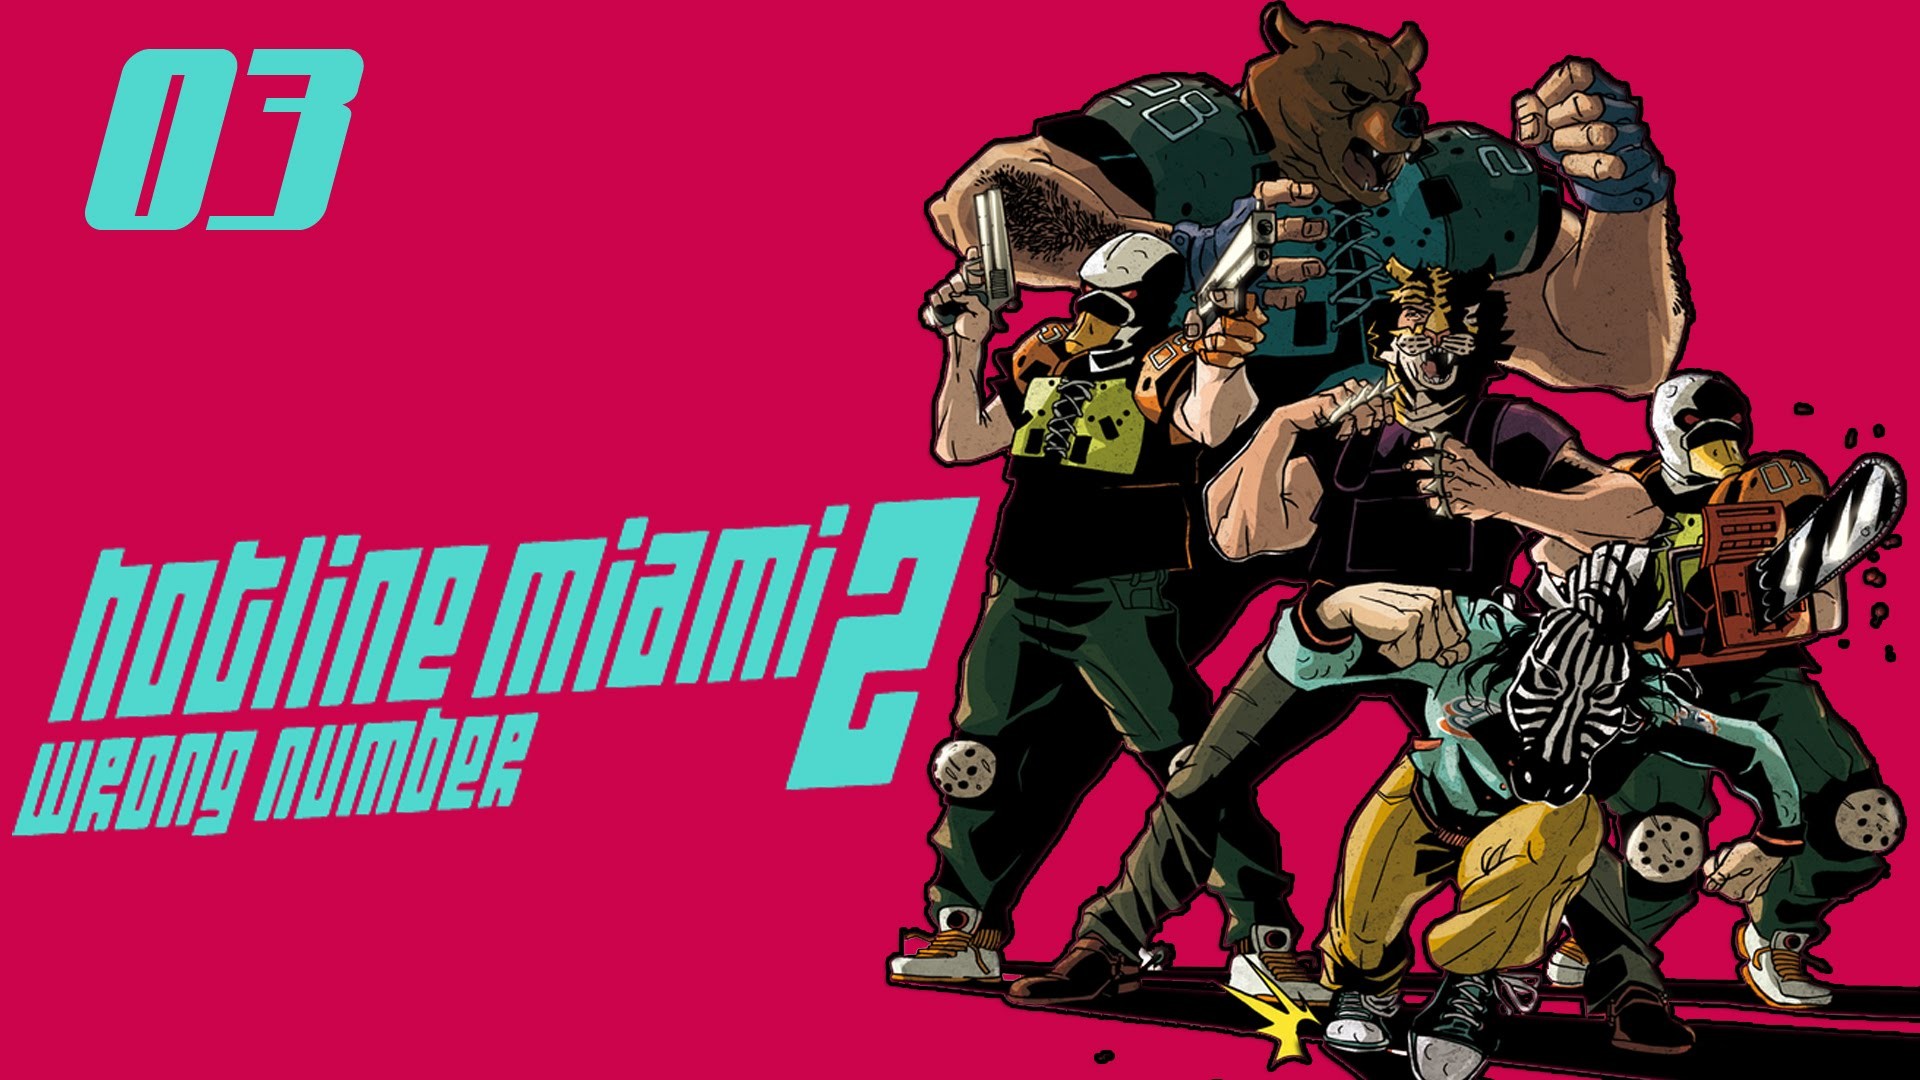 1920x1080 Image result for hotline miami 2